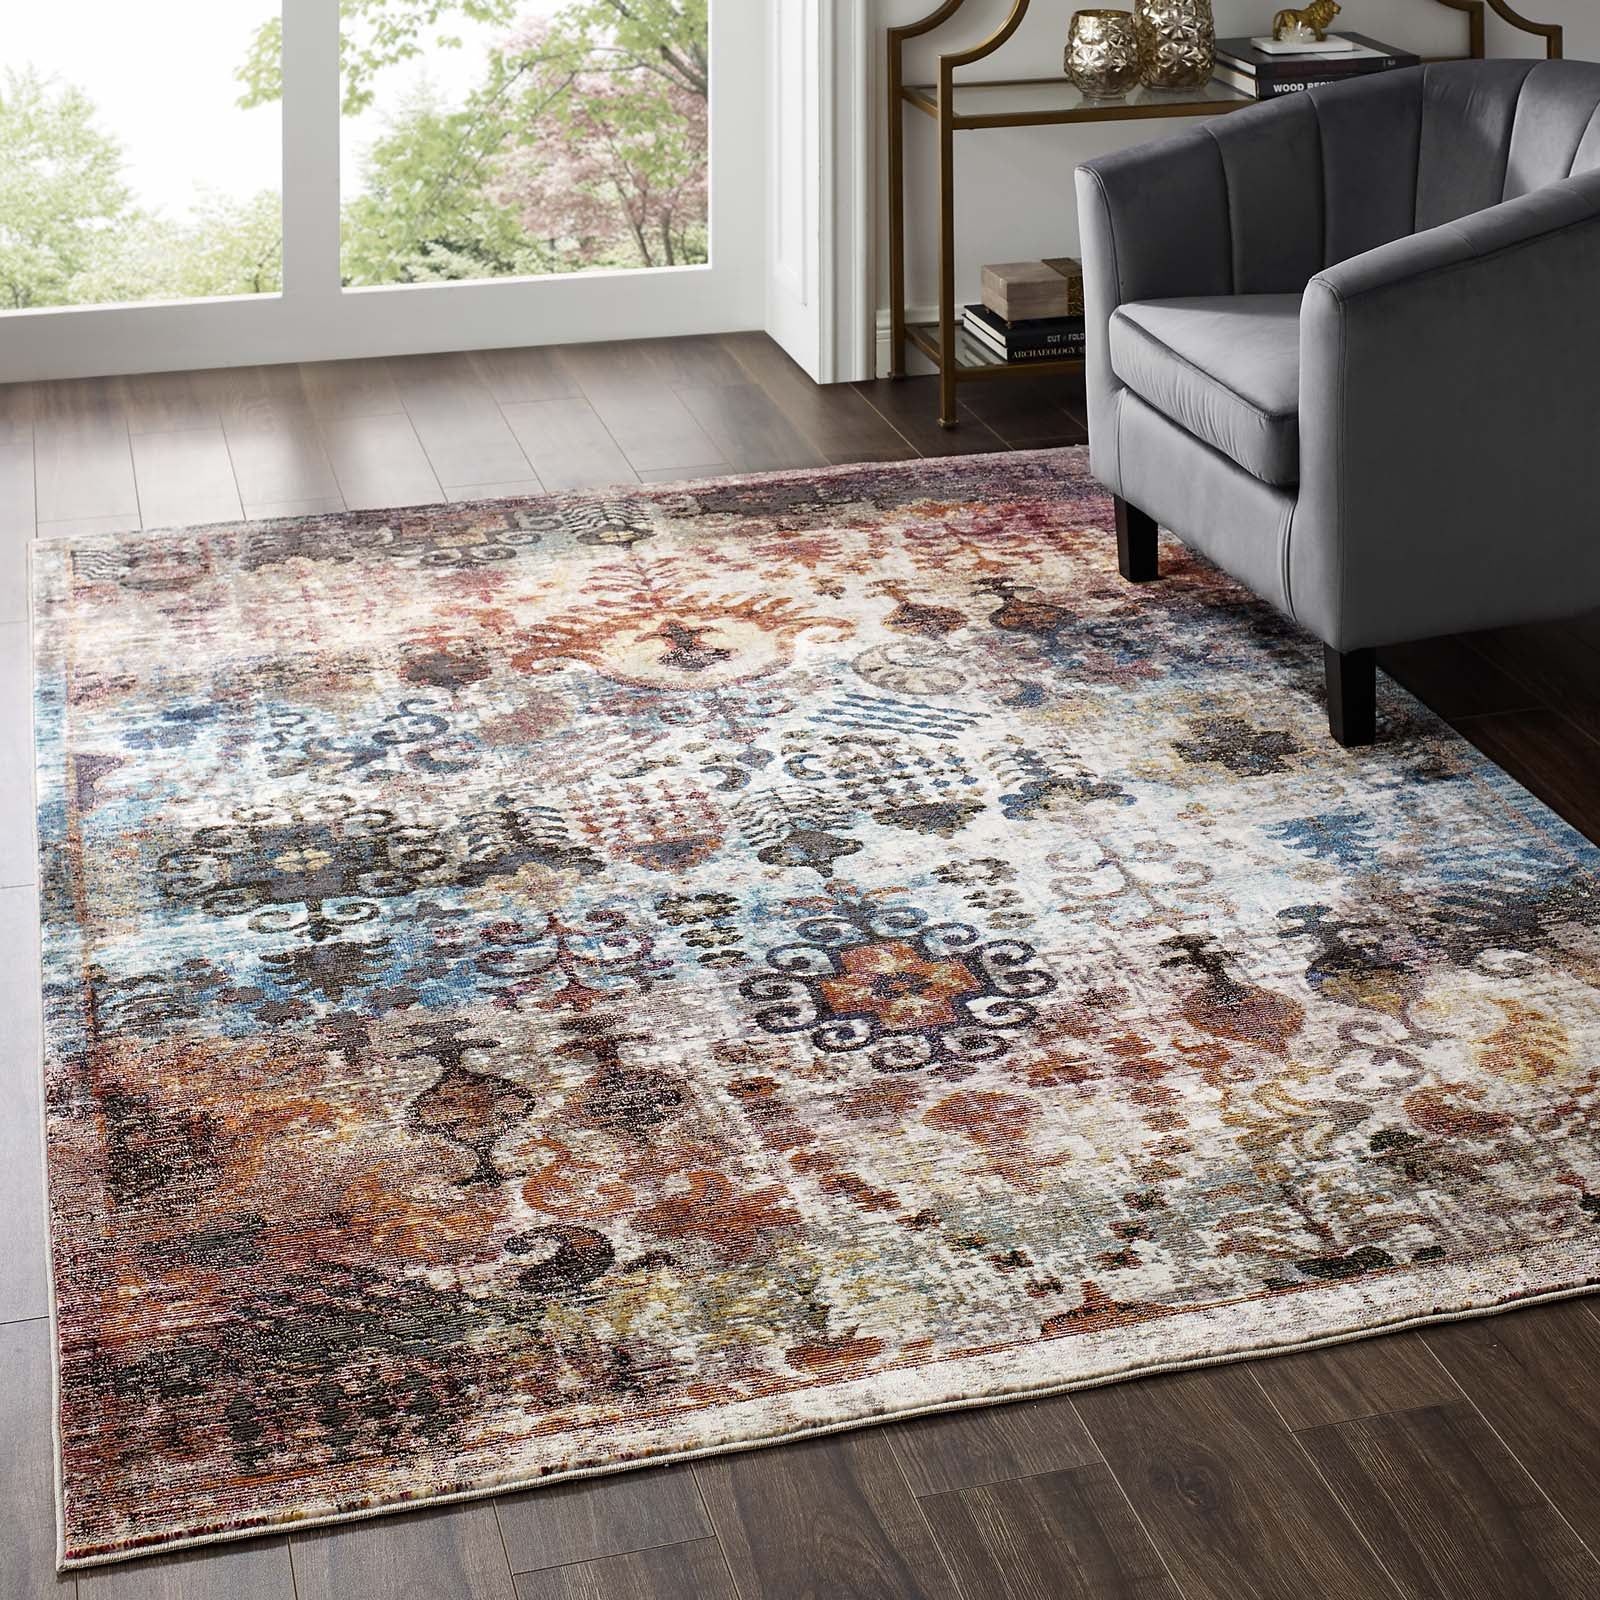 Success Tahira Transitional Distressed Vintage Floral Moroccan Trellis 4x6 Area Rug - East Shore Modern Home Furnishings